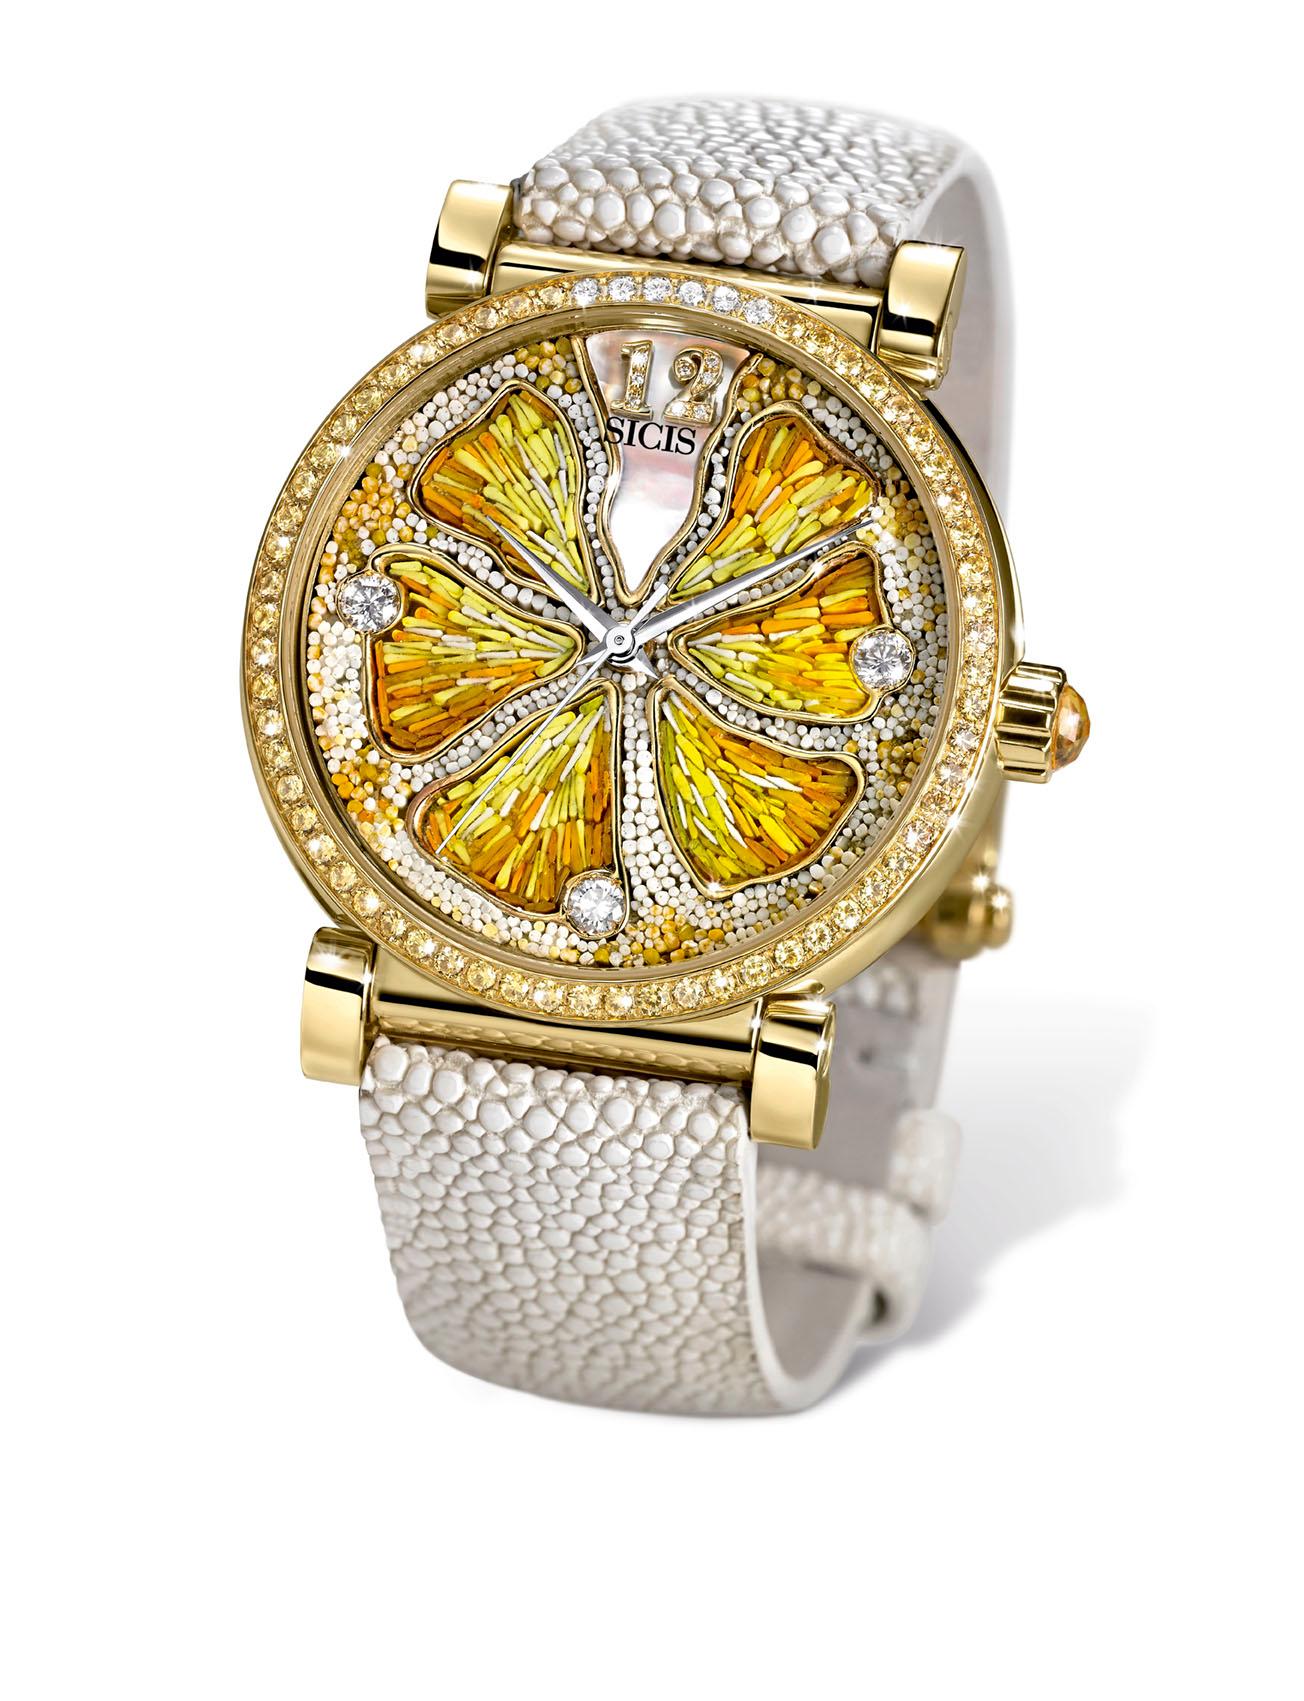 Modern Watch Gold White Diamonds Sapphires Mother of Pearl Galuchat Strap Micro Mosaic For Sale